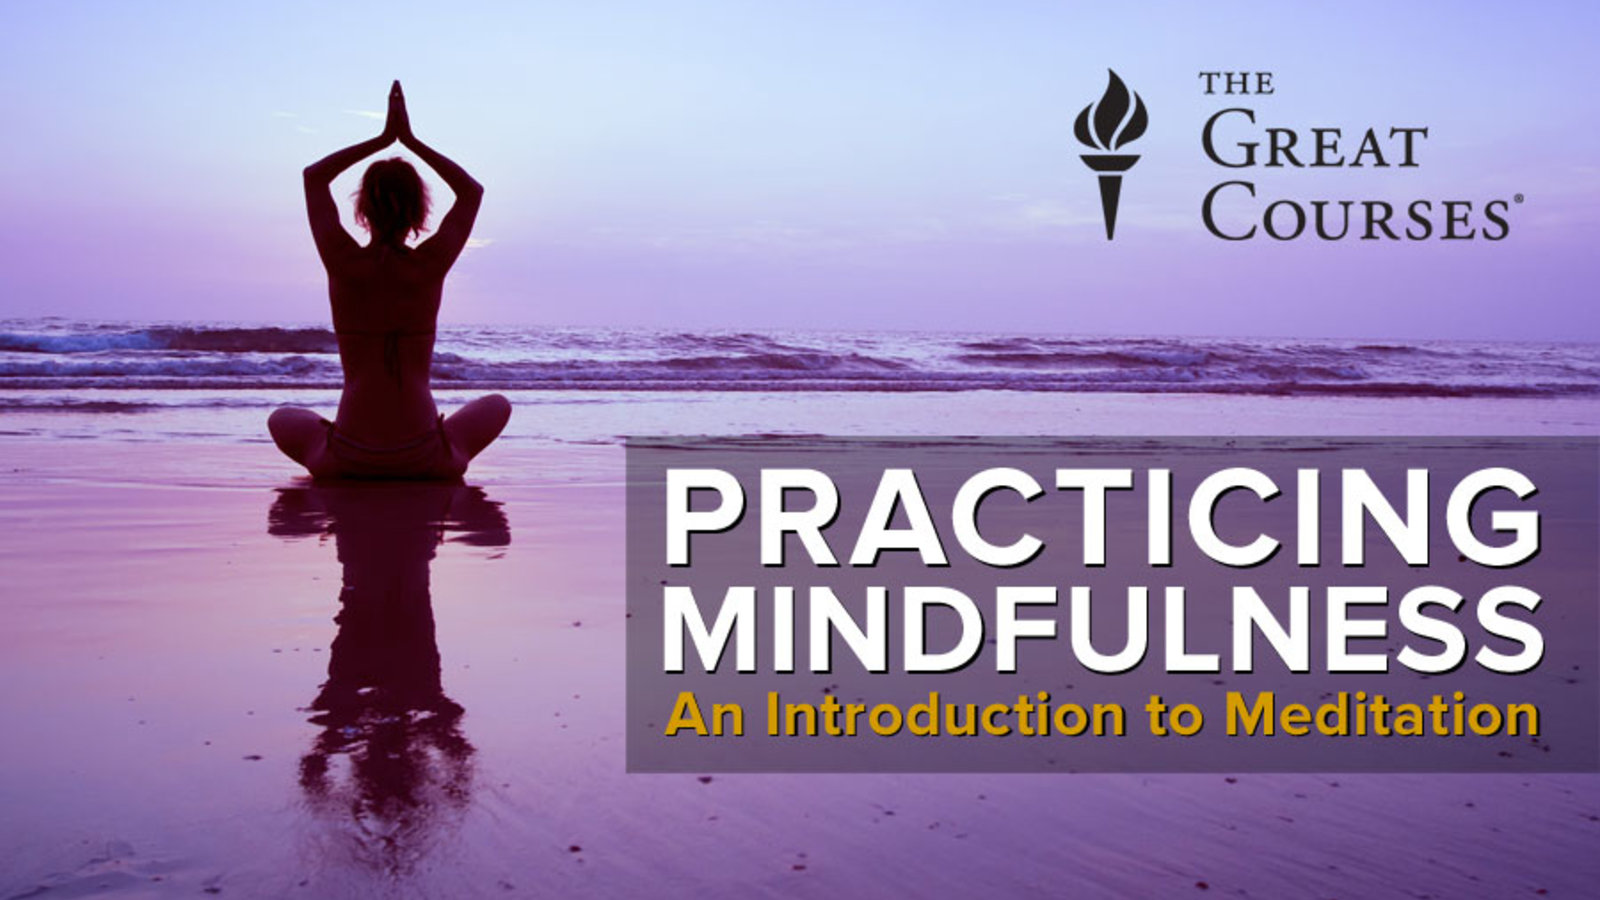 Practicing Mindfulness, Kanopy, Great Courses, Meditation, Jacksonville Public Library